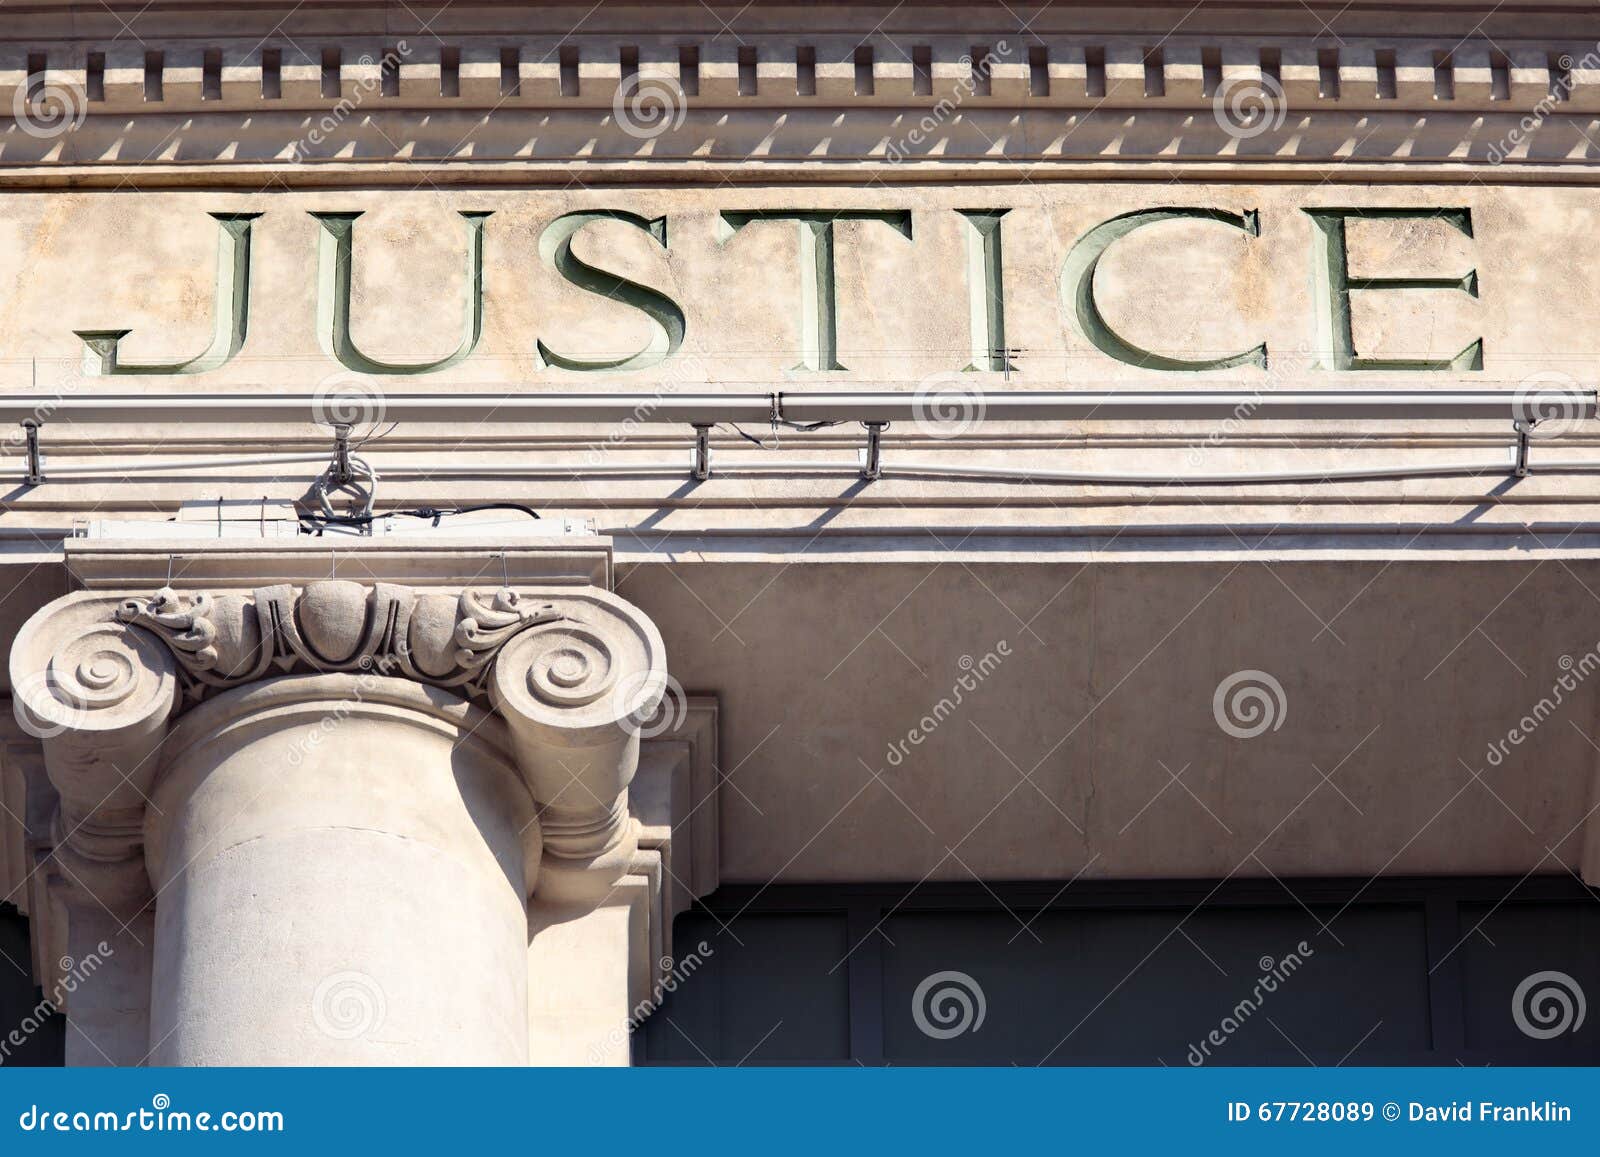 justice sign on a courtroom building, law courts